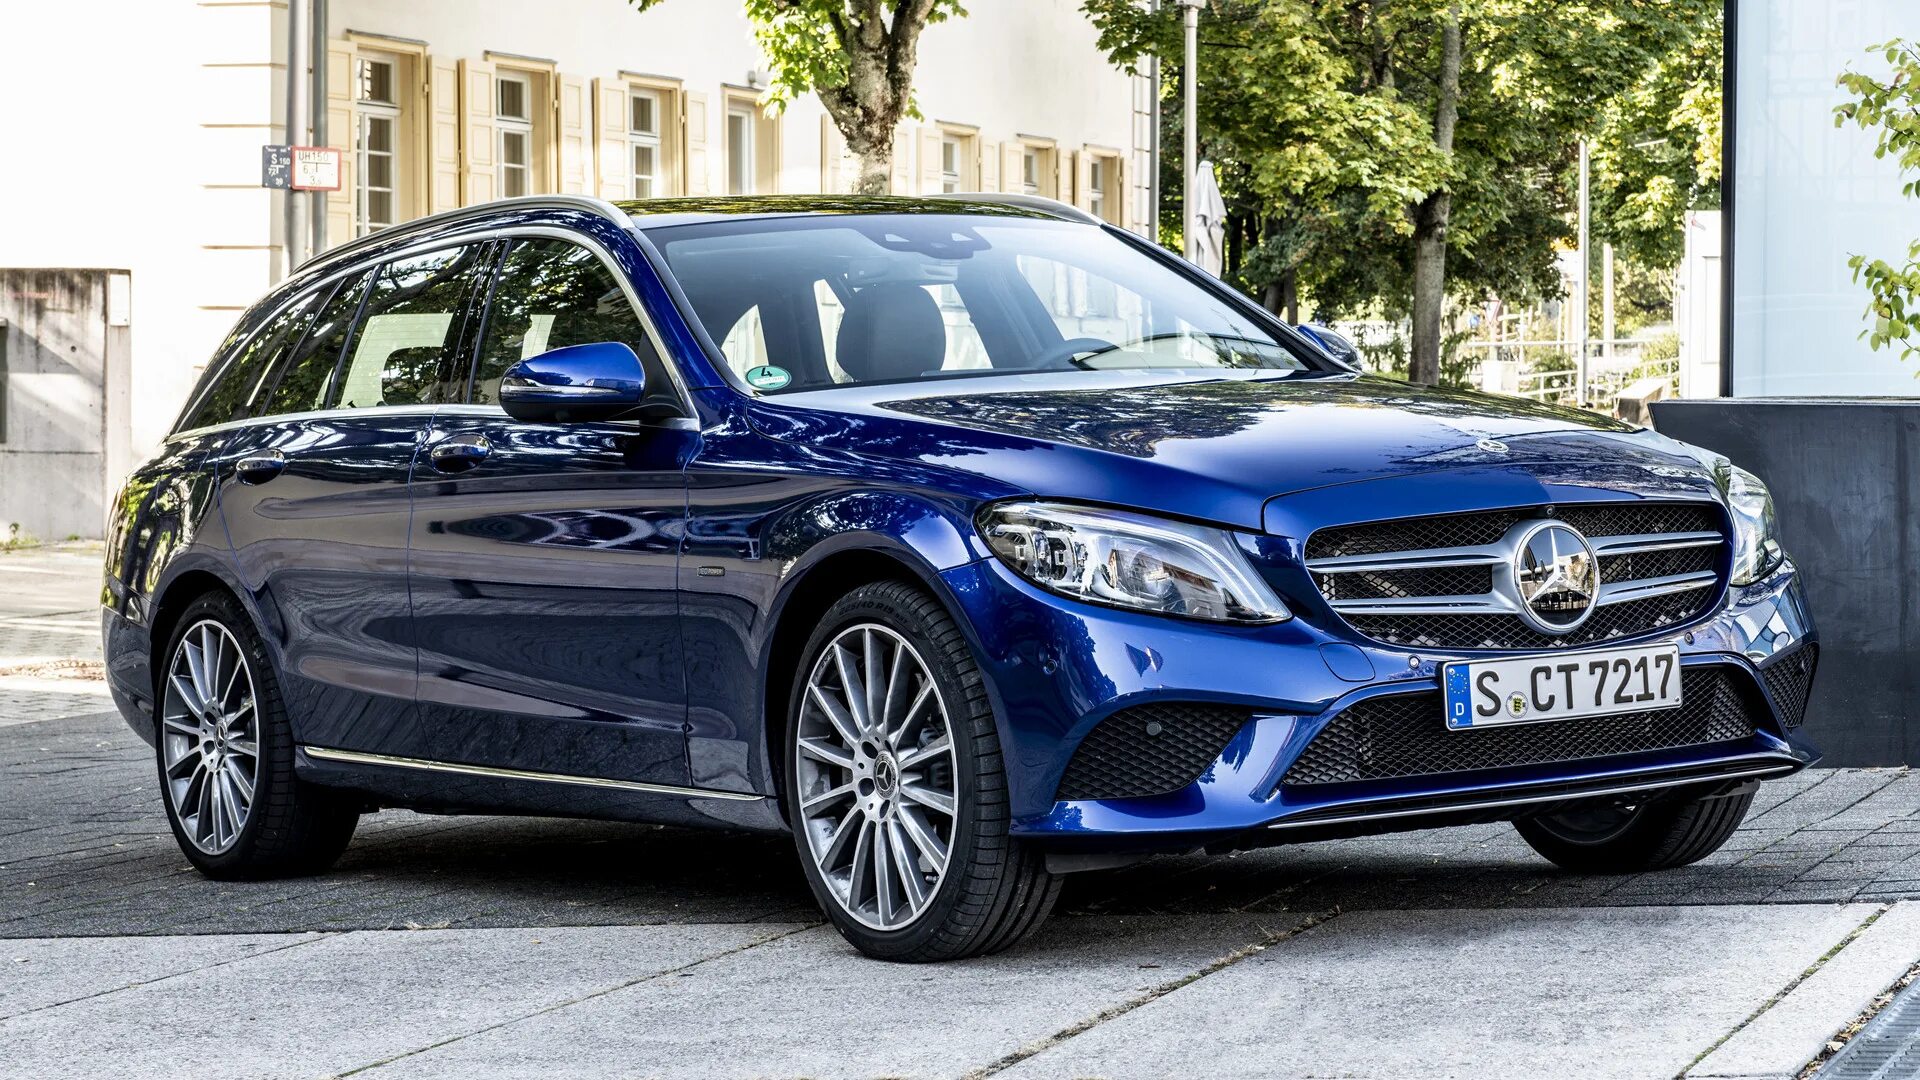 Mercedes hybrid. Mercedes c300 Hybrid. Mercedes w205 Wagon. Mercedes Benz c class Station Wagon 2019. Мерседес е класс 2018 Hybrid.